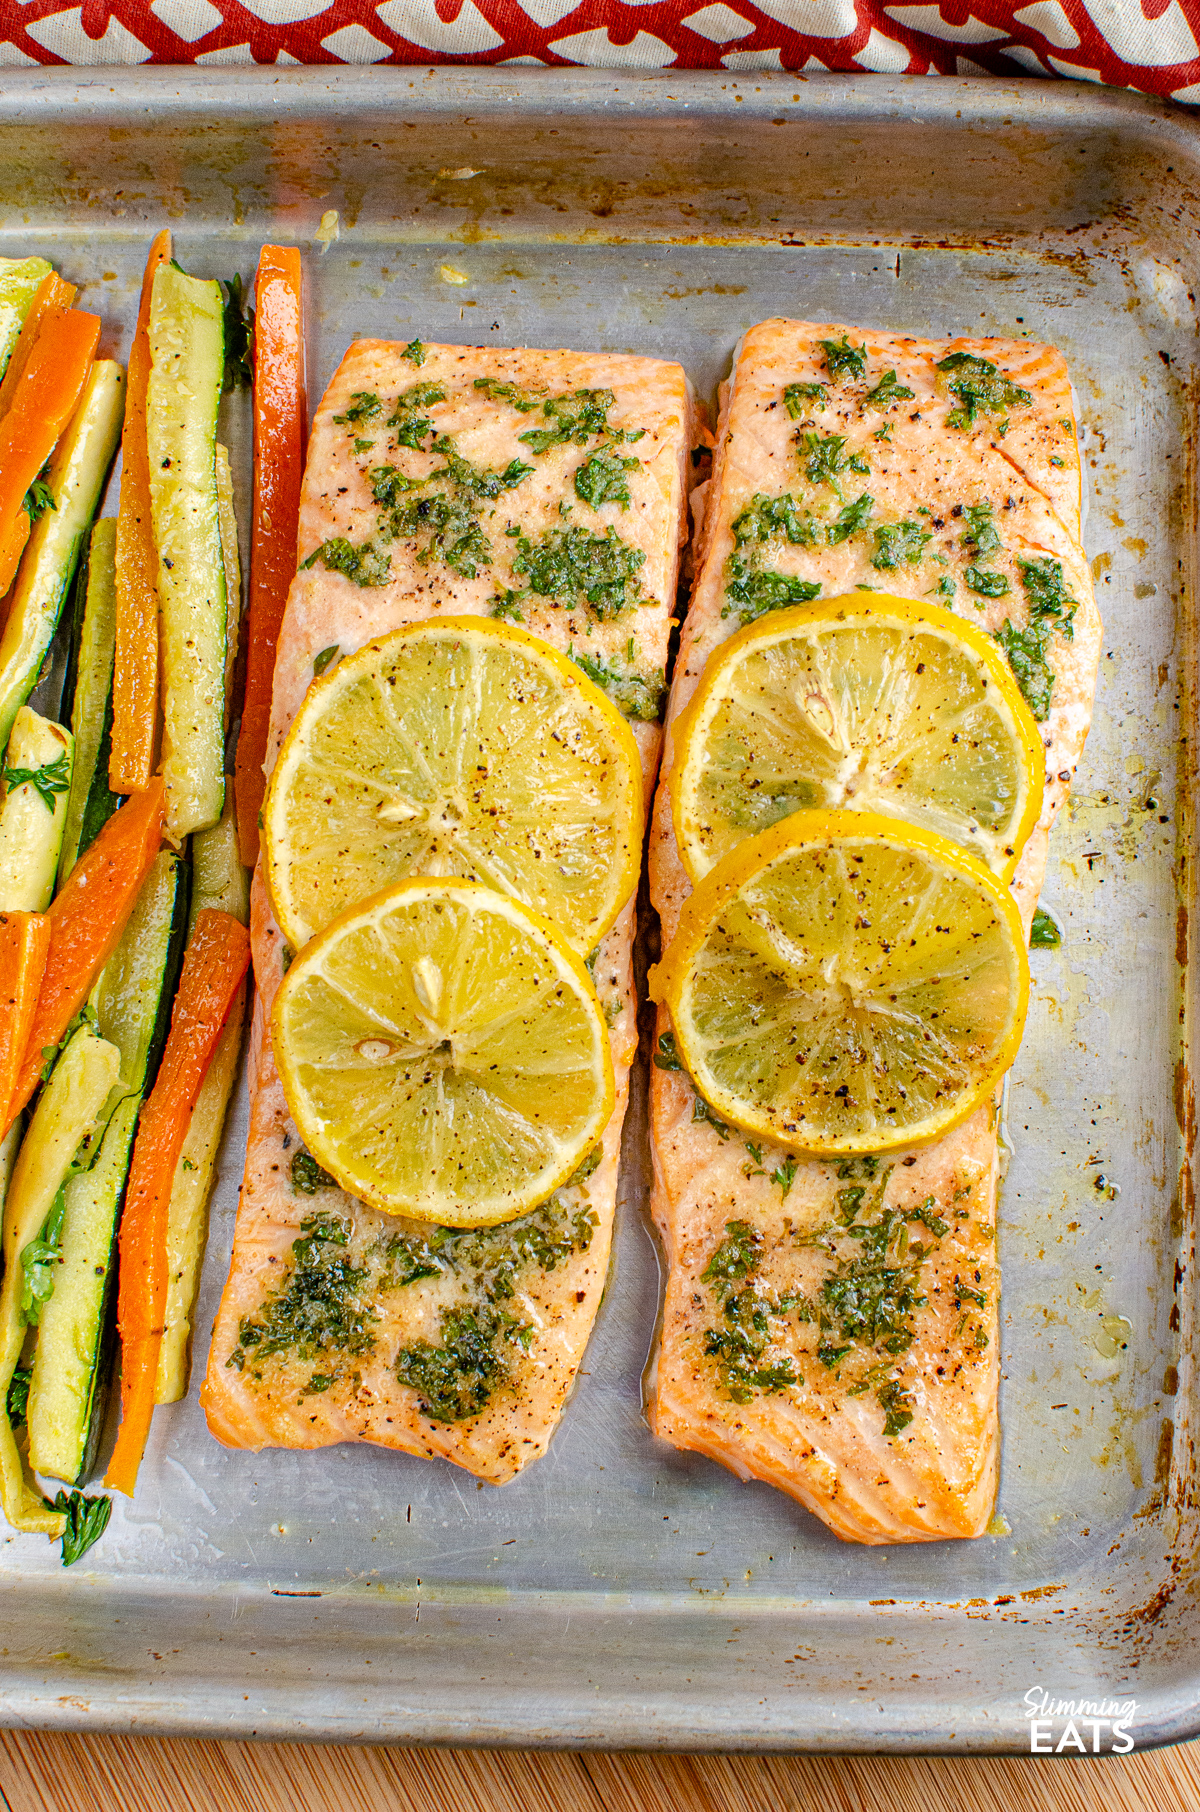 Lemon and Herb Butter Salmon topped with lemon slices with carrot and zucchini batons on a baking sheet